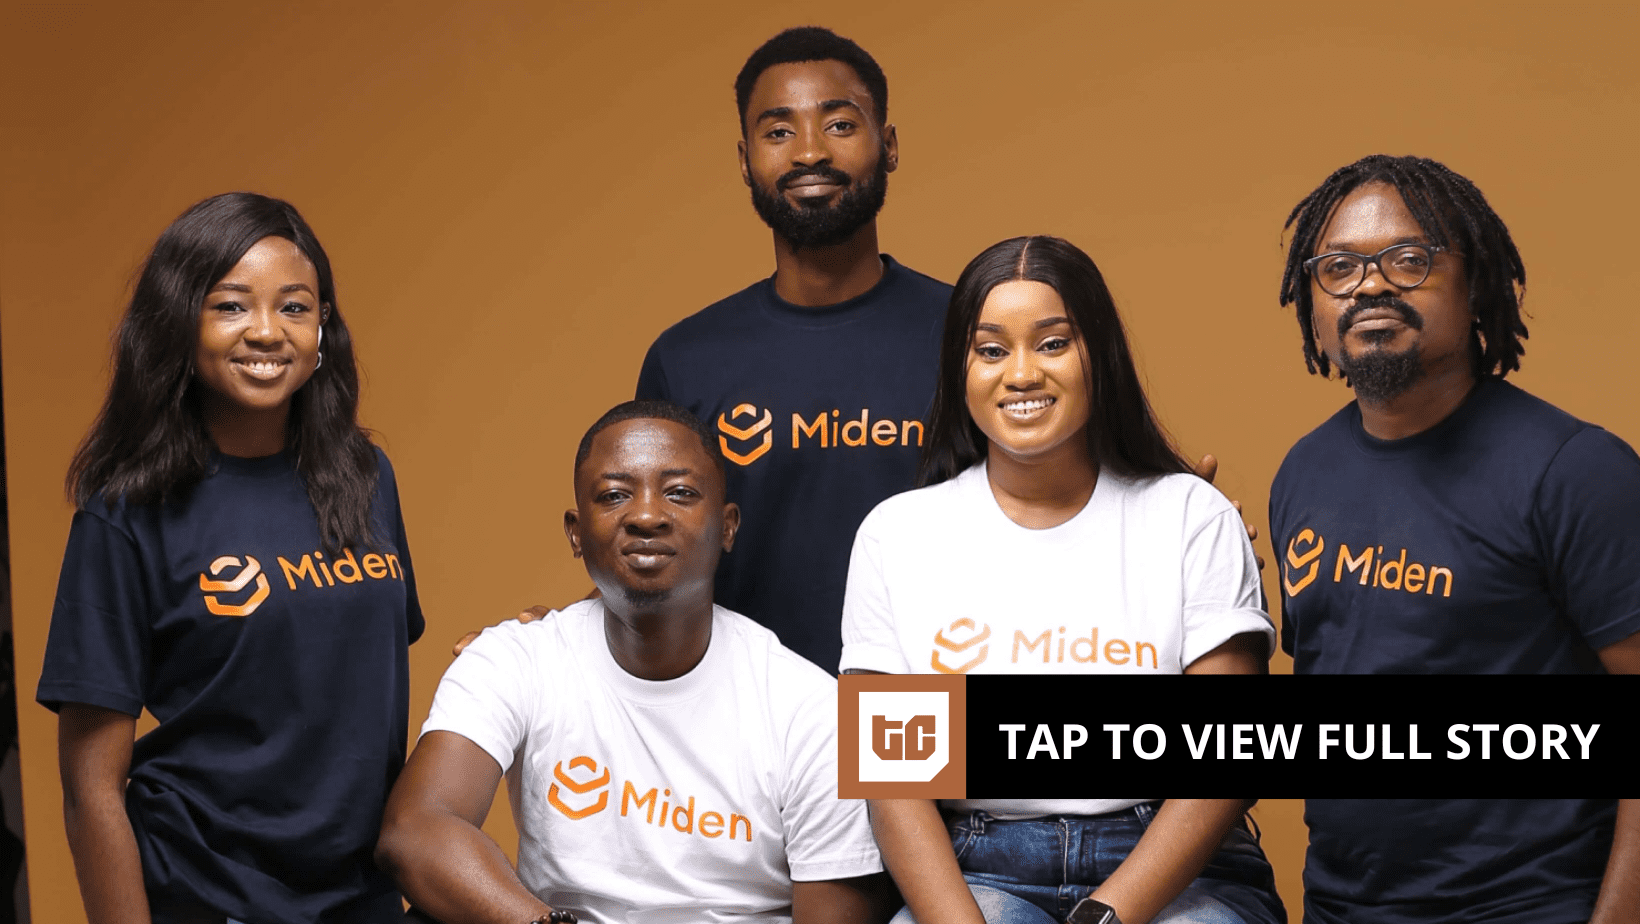 YC-backed Miden has big ambitions in challenging virtual card space